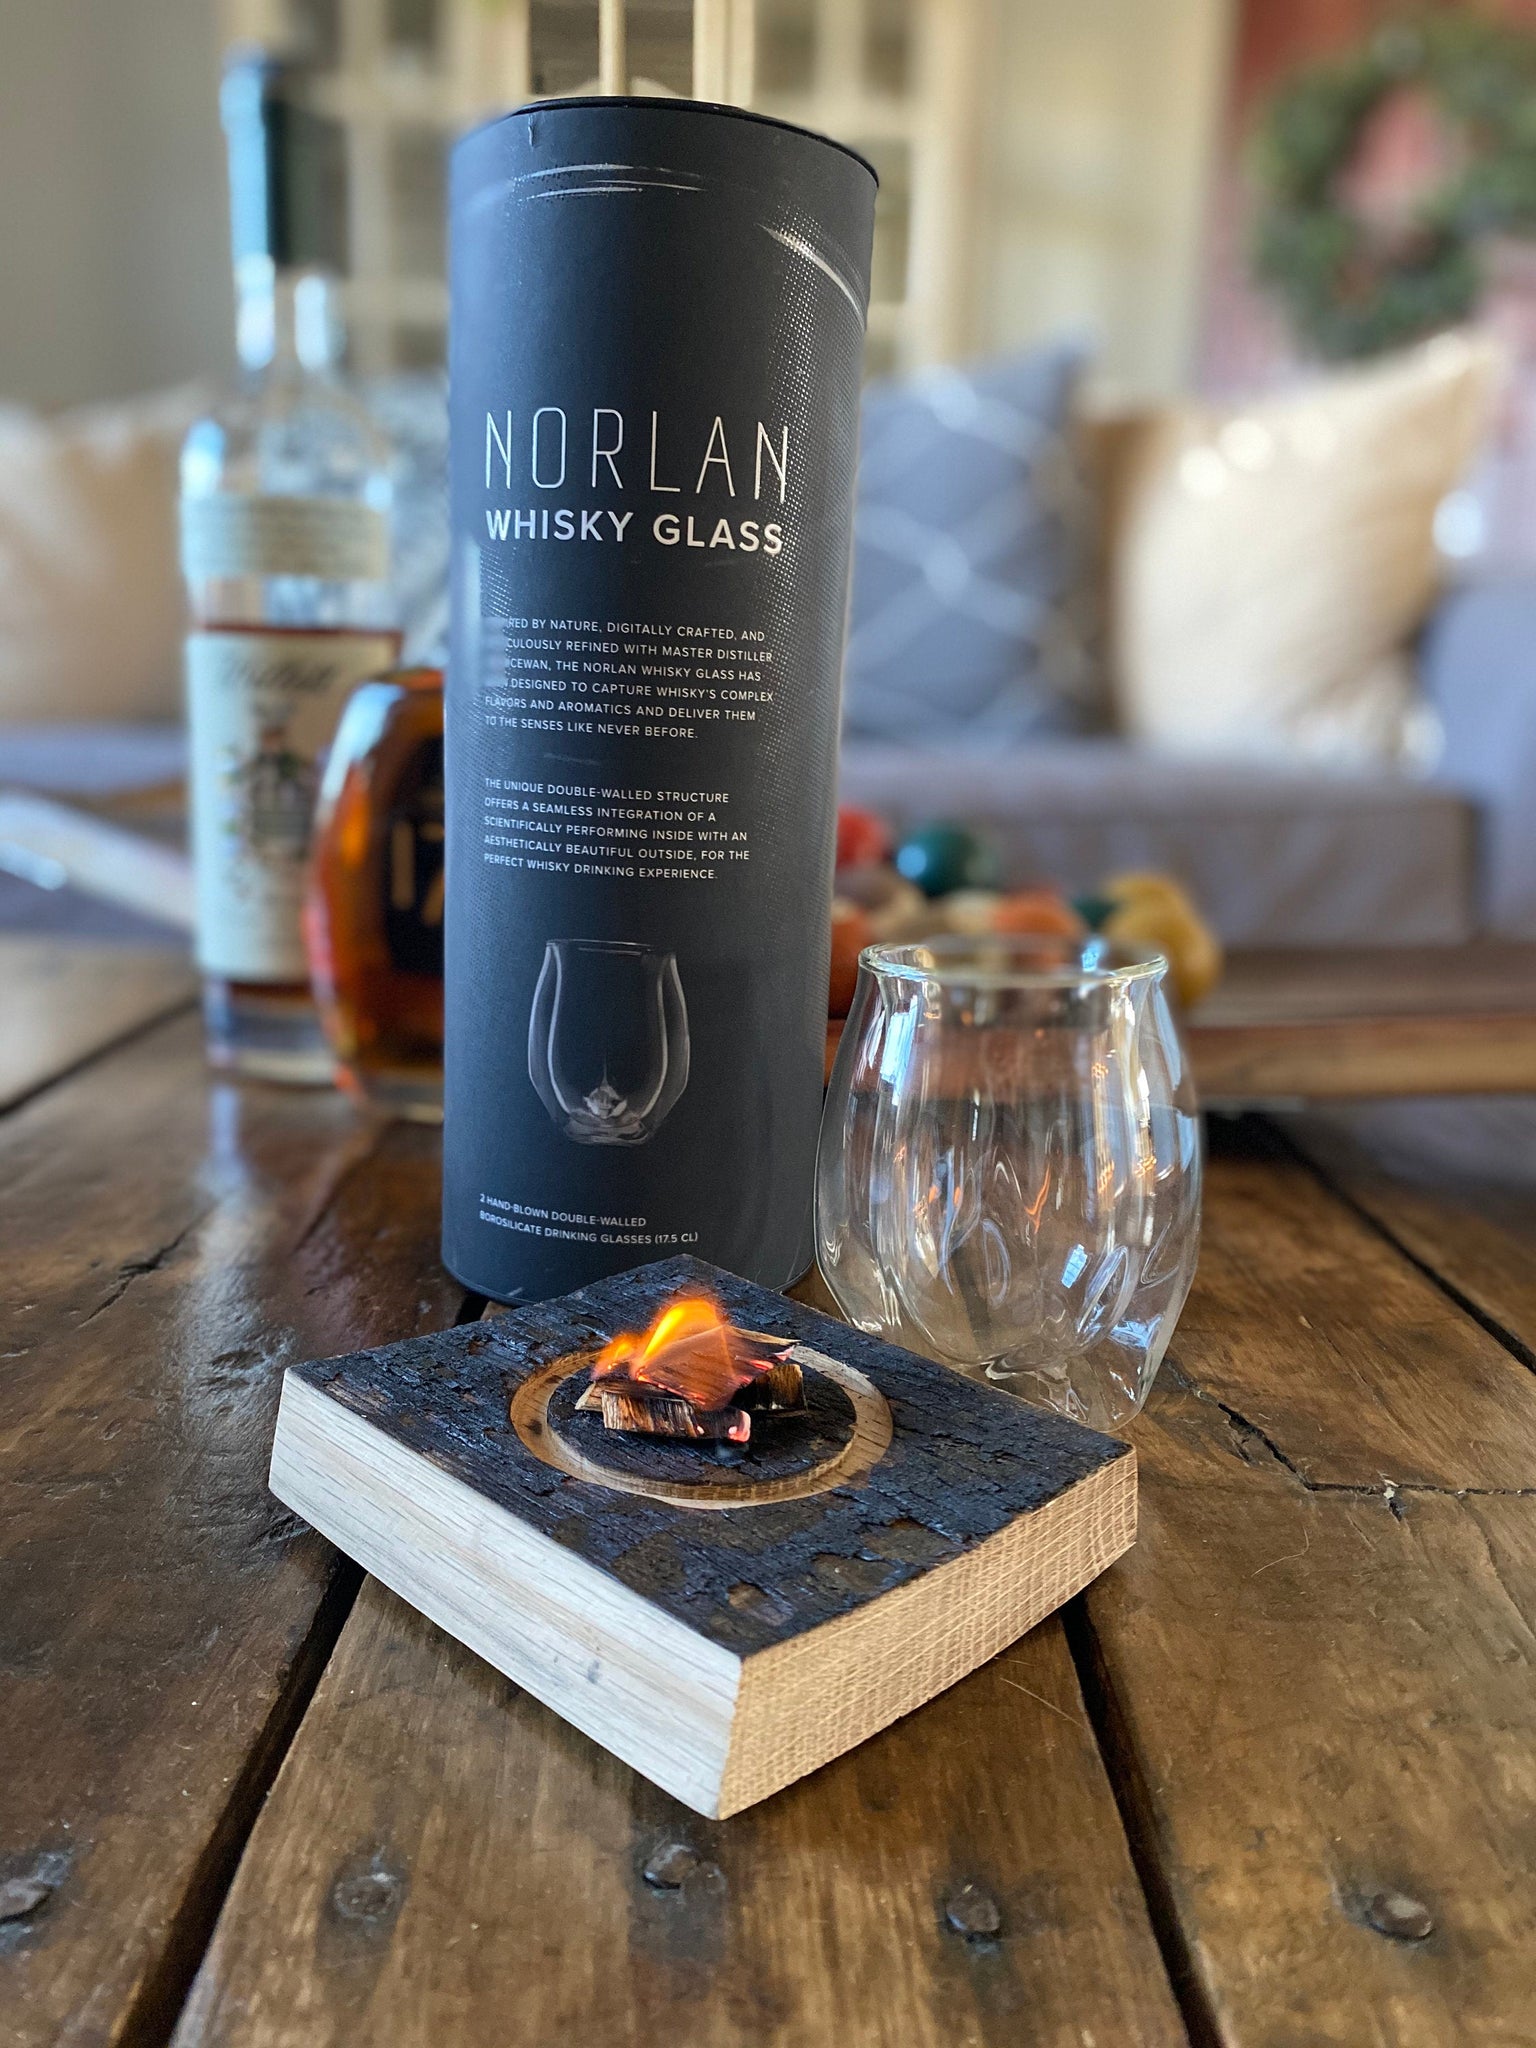 Norlan Whisky Glass: a must-have for whisky drinkers